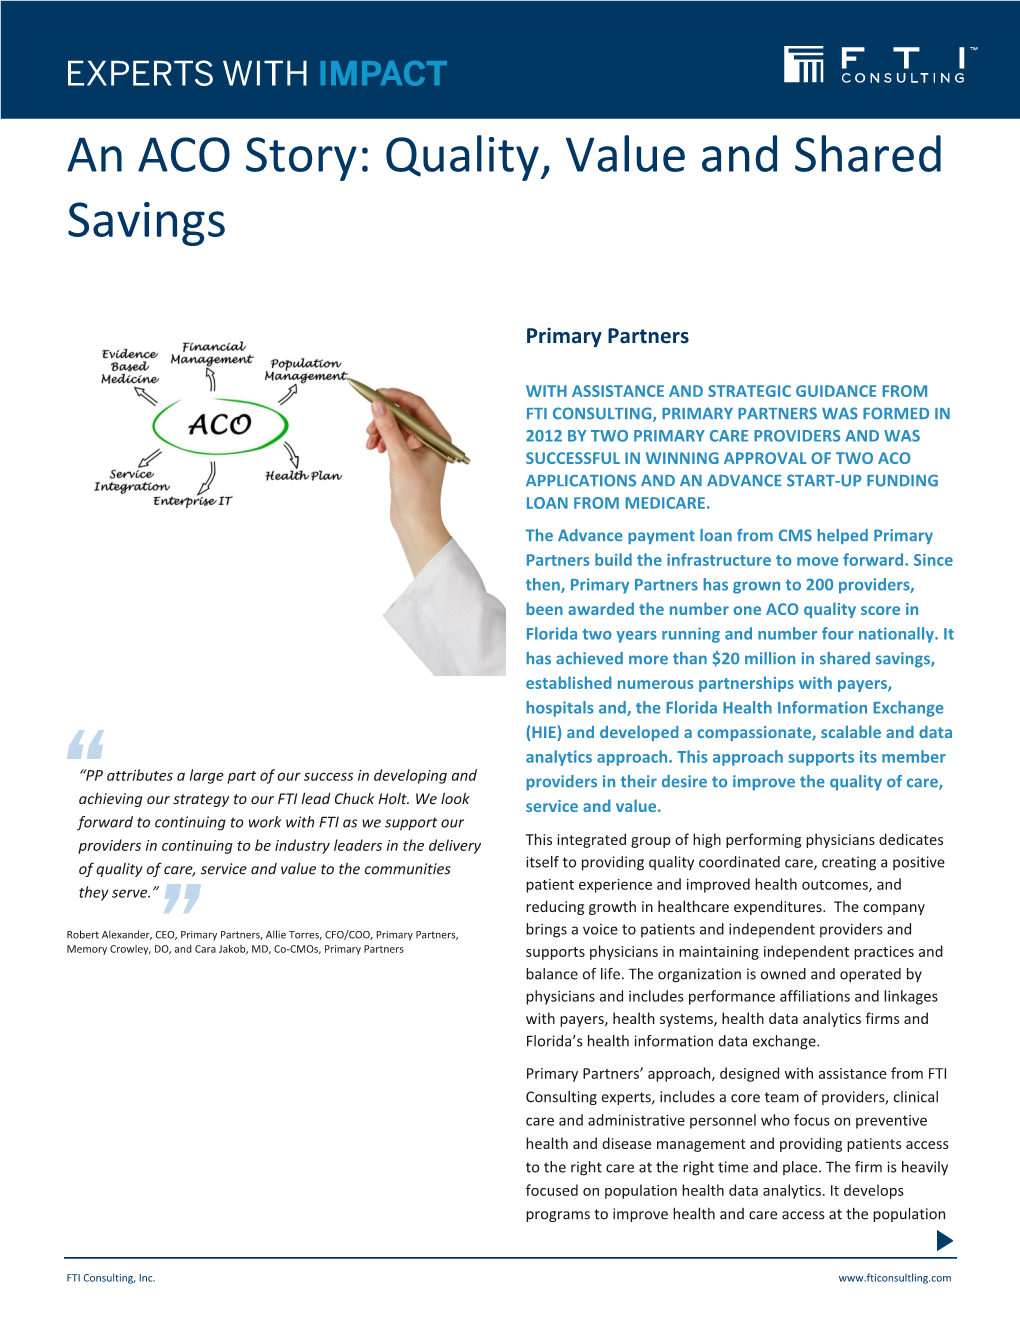 An ACO Story: Quality, Value and Shared Savings